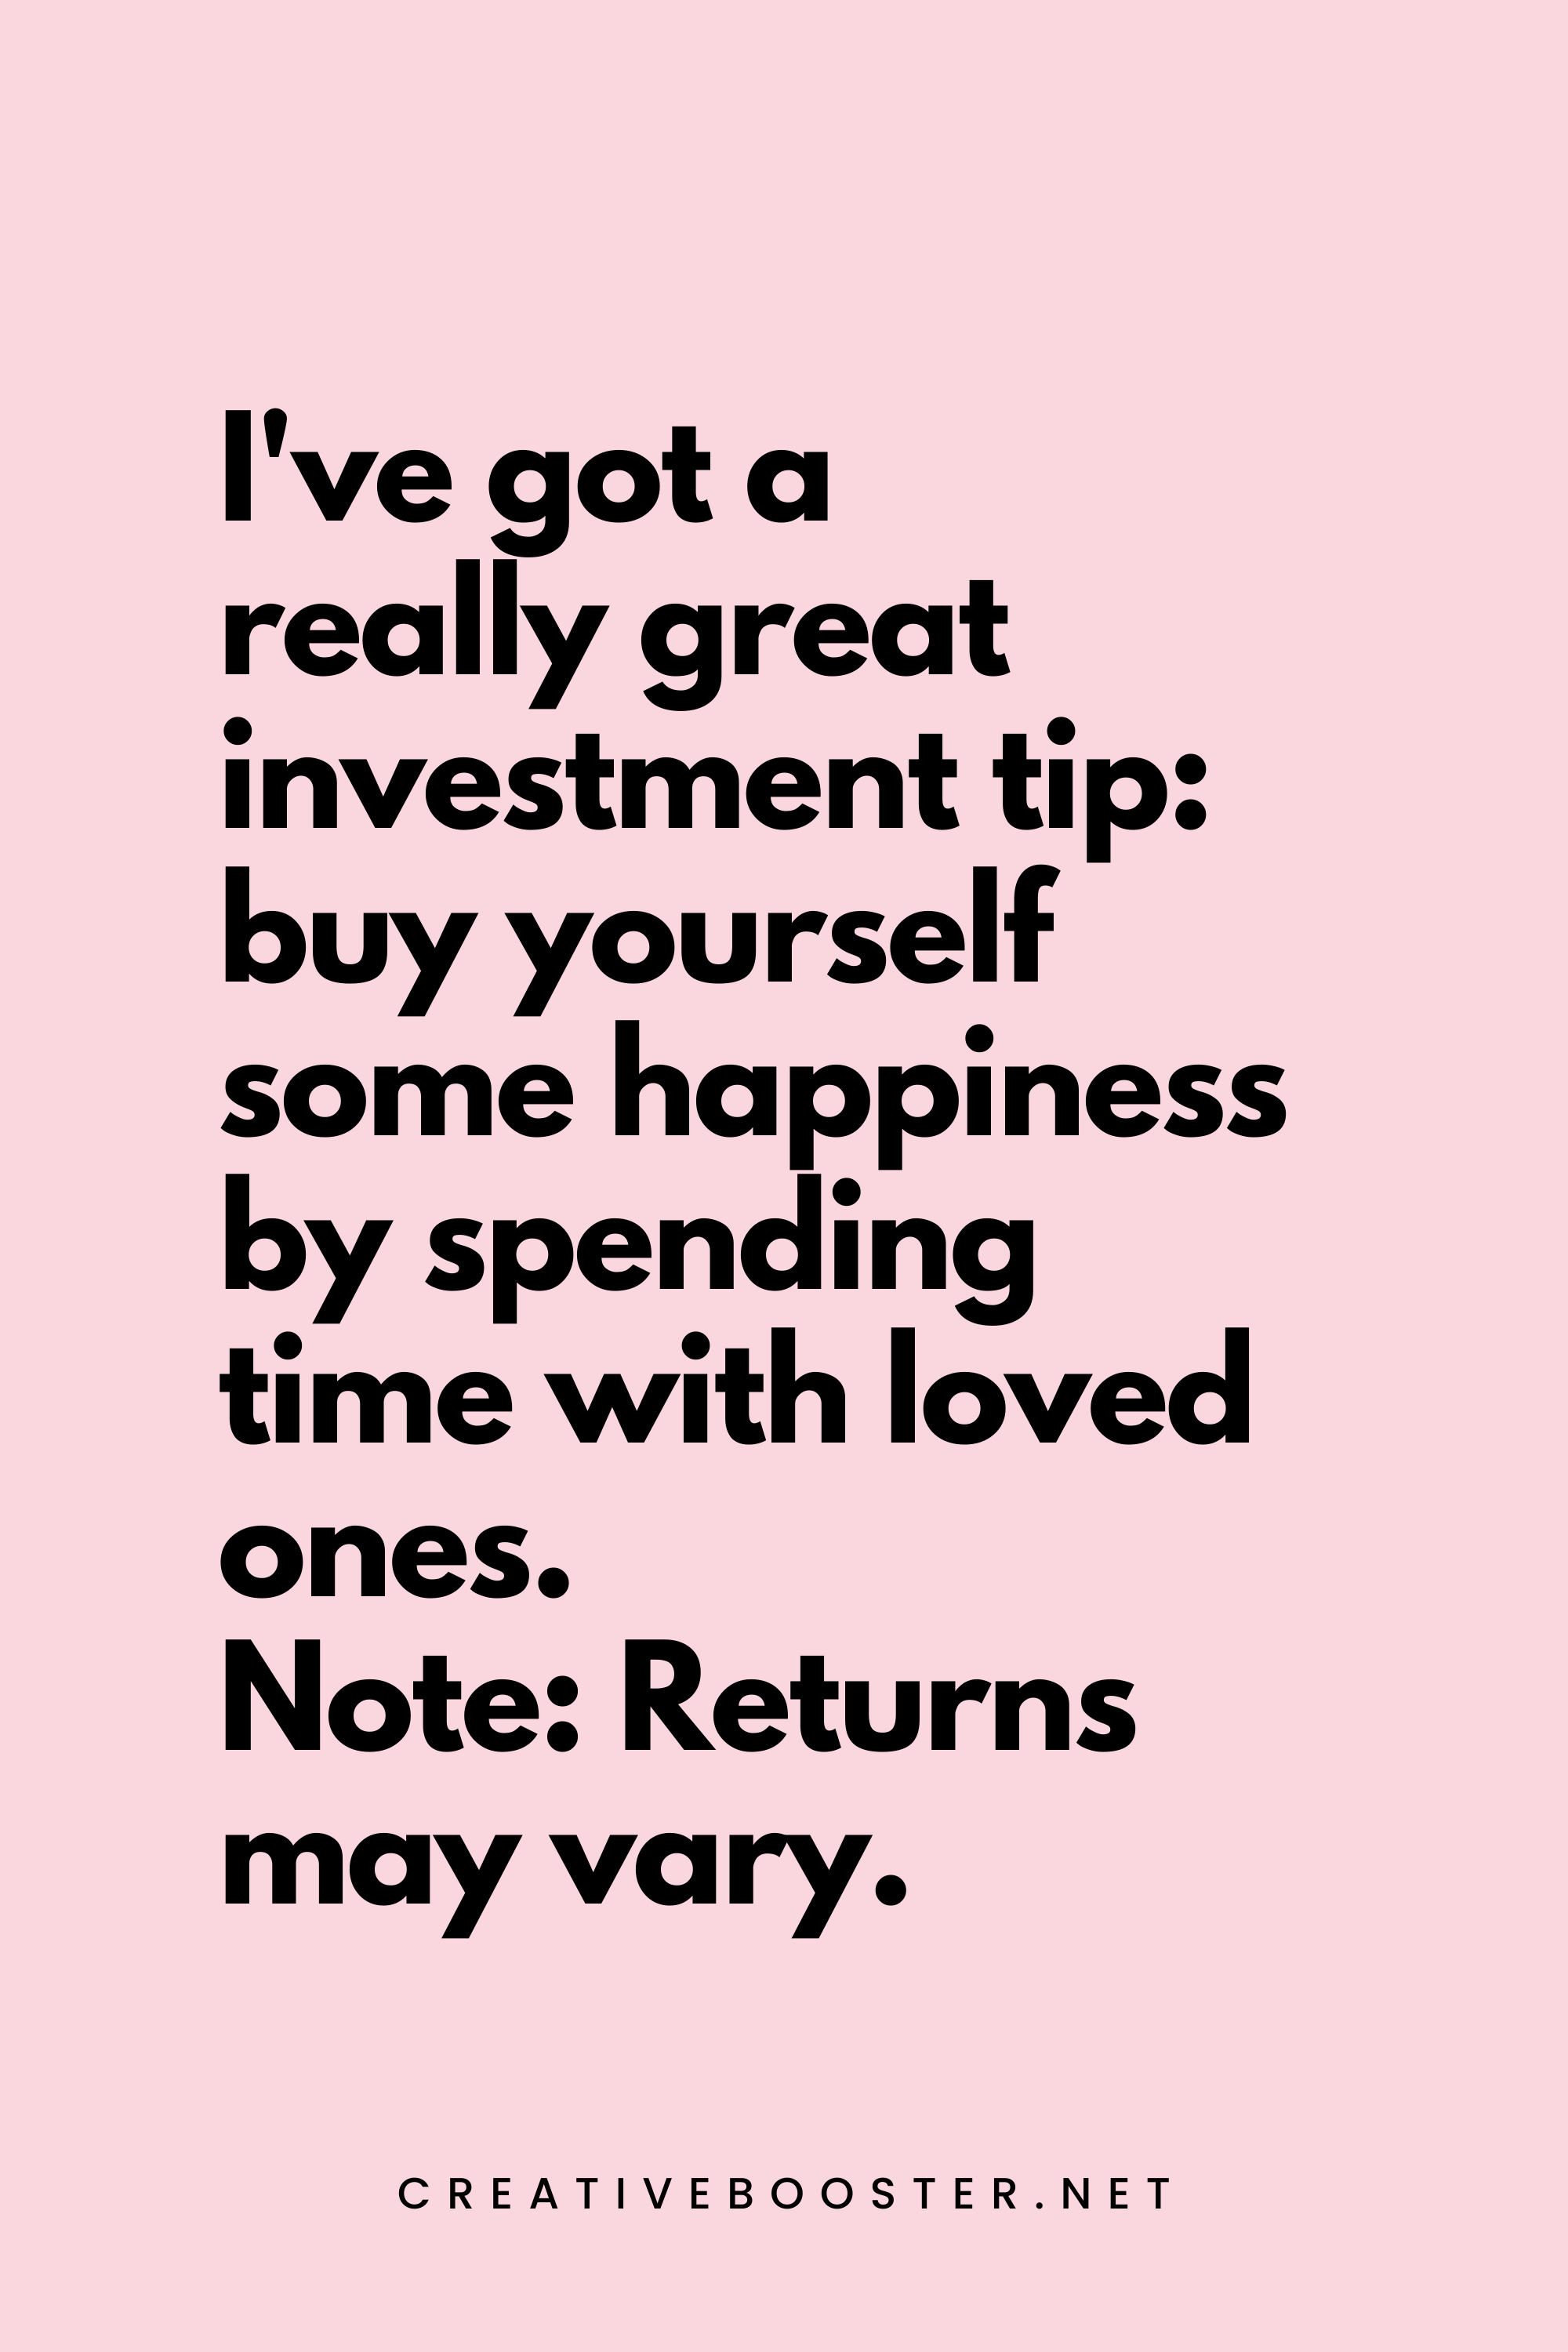 61. I've got a really great investment tip: buy yourself some happiness by spending time with loved ones. Note: Returns may vary. - Creativebooster.net - 6. Funny Financial Freedom Quotes